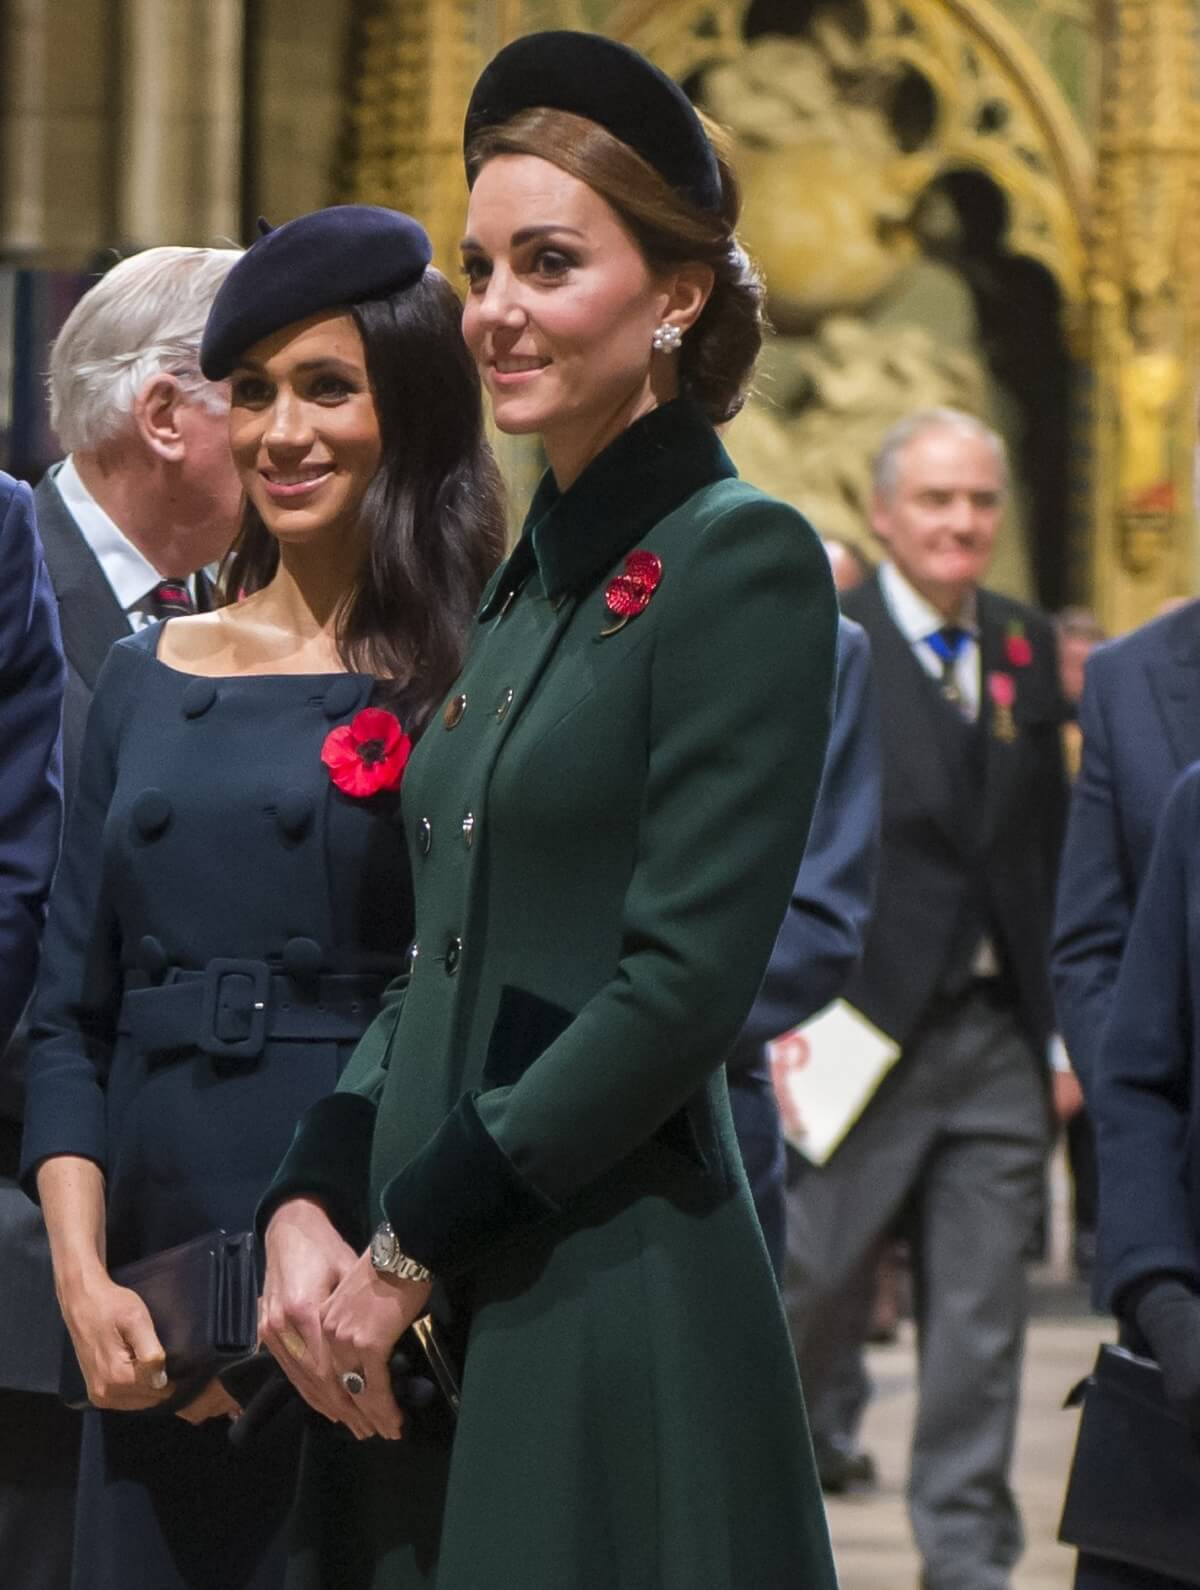 Meghan Markle and Kate Middleton attend a service marking the centenary of WW1 armistice at Westminster Abbey in 2018